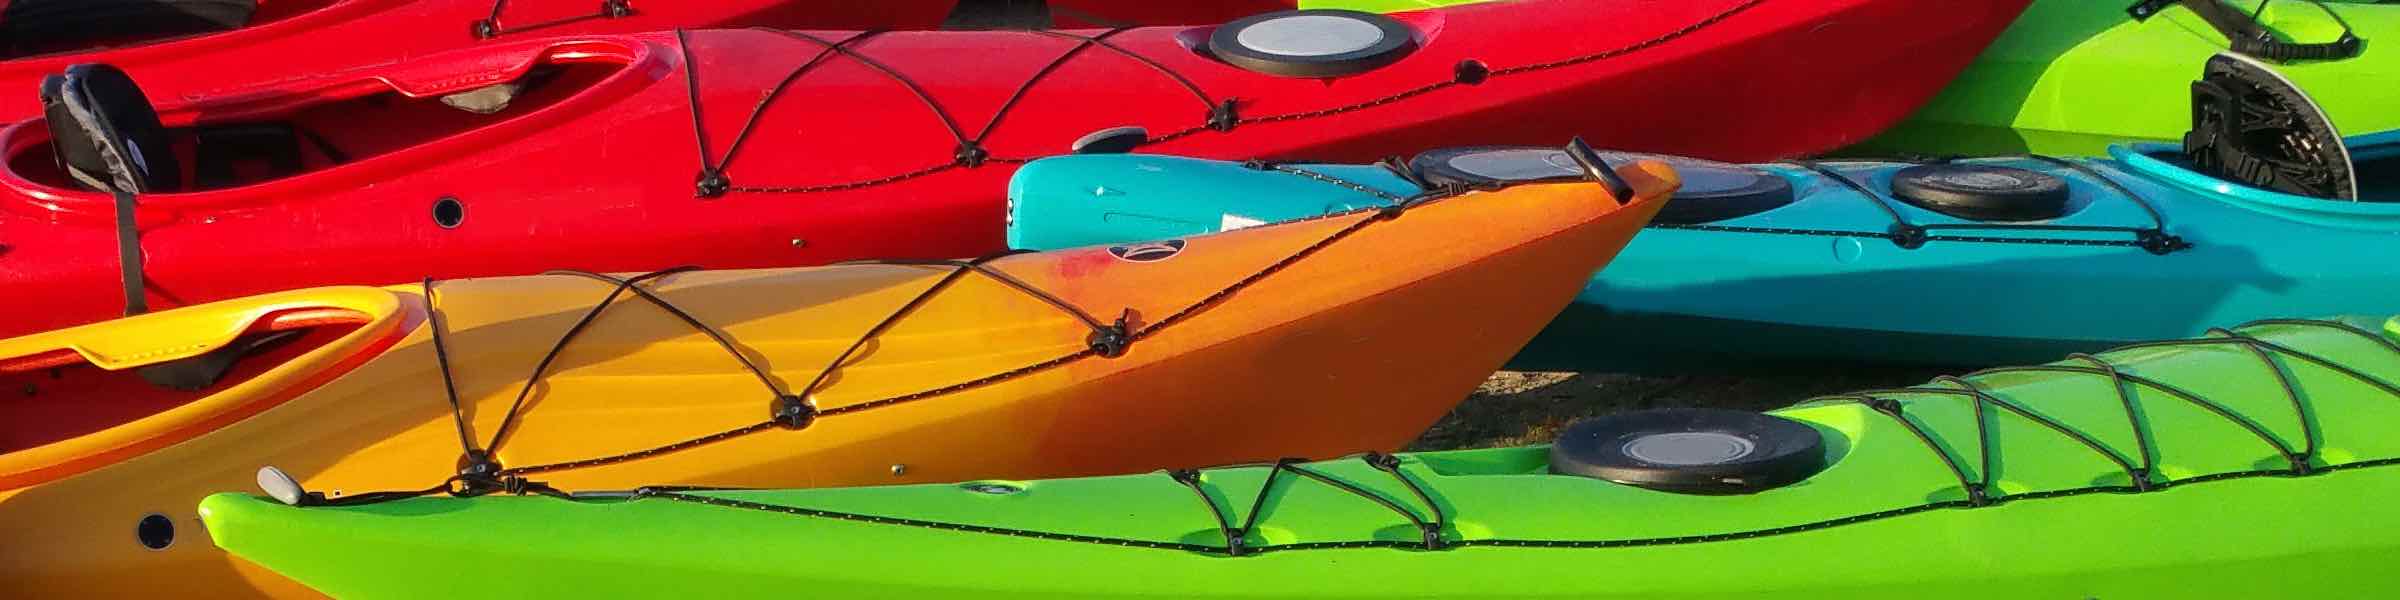 Several colorful kayaks pulled up together on a beach.